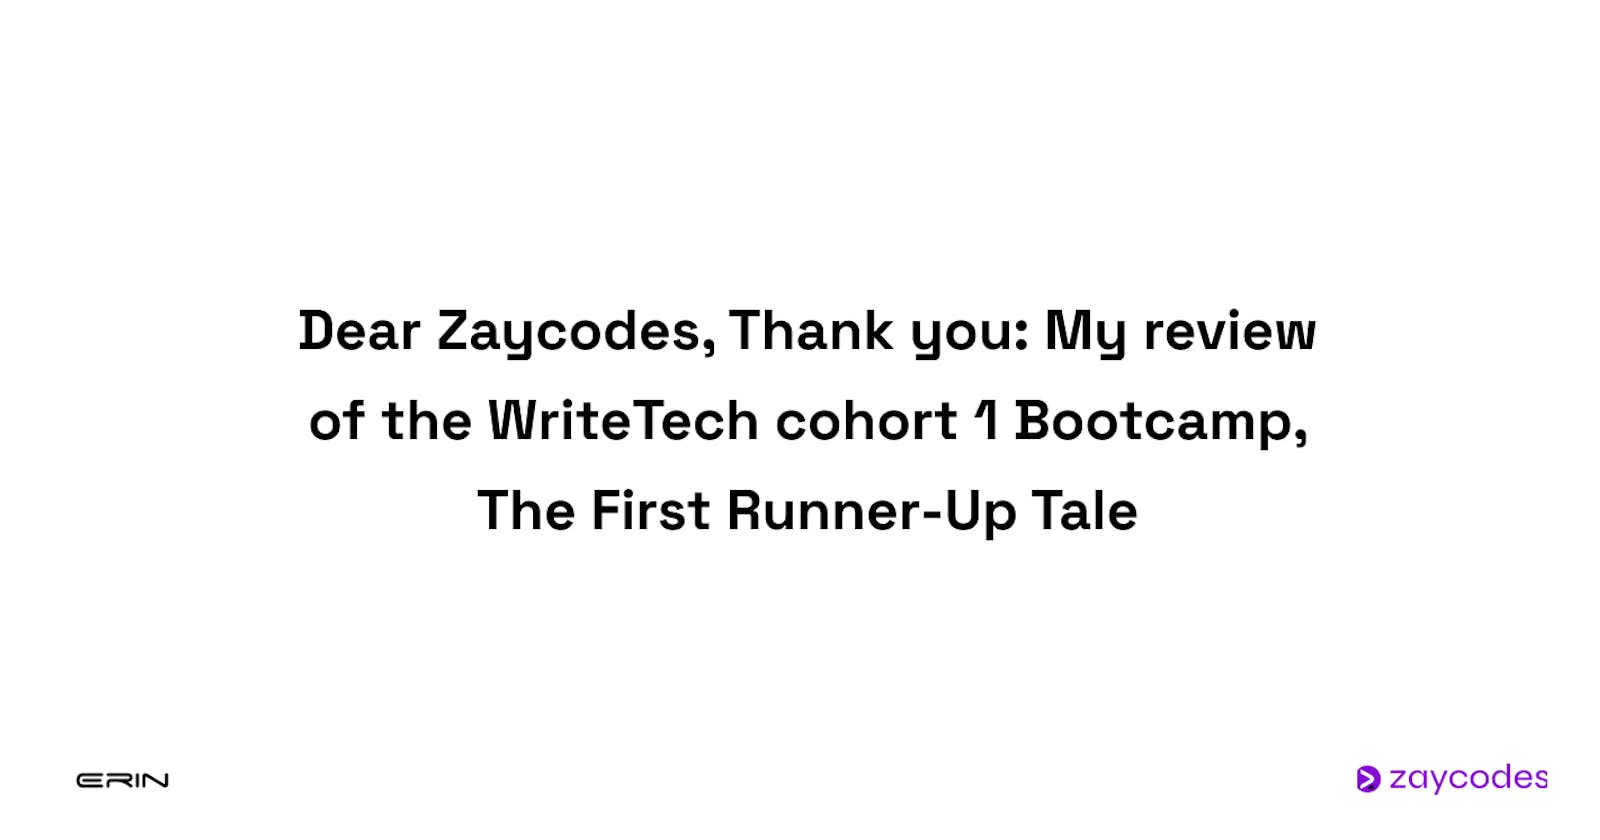 Dear Zaycodes, Thank you: My review of the WriteTech cohort 1 Bootcamp, The First Runner-Up Tale.